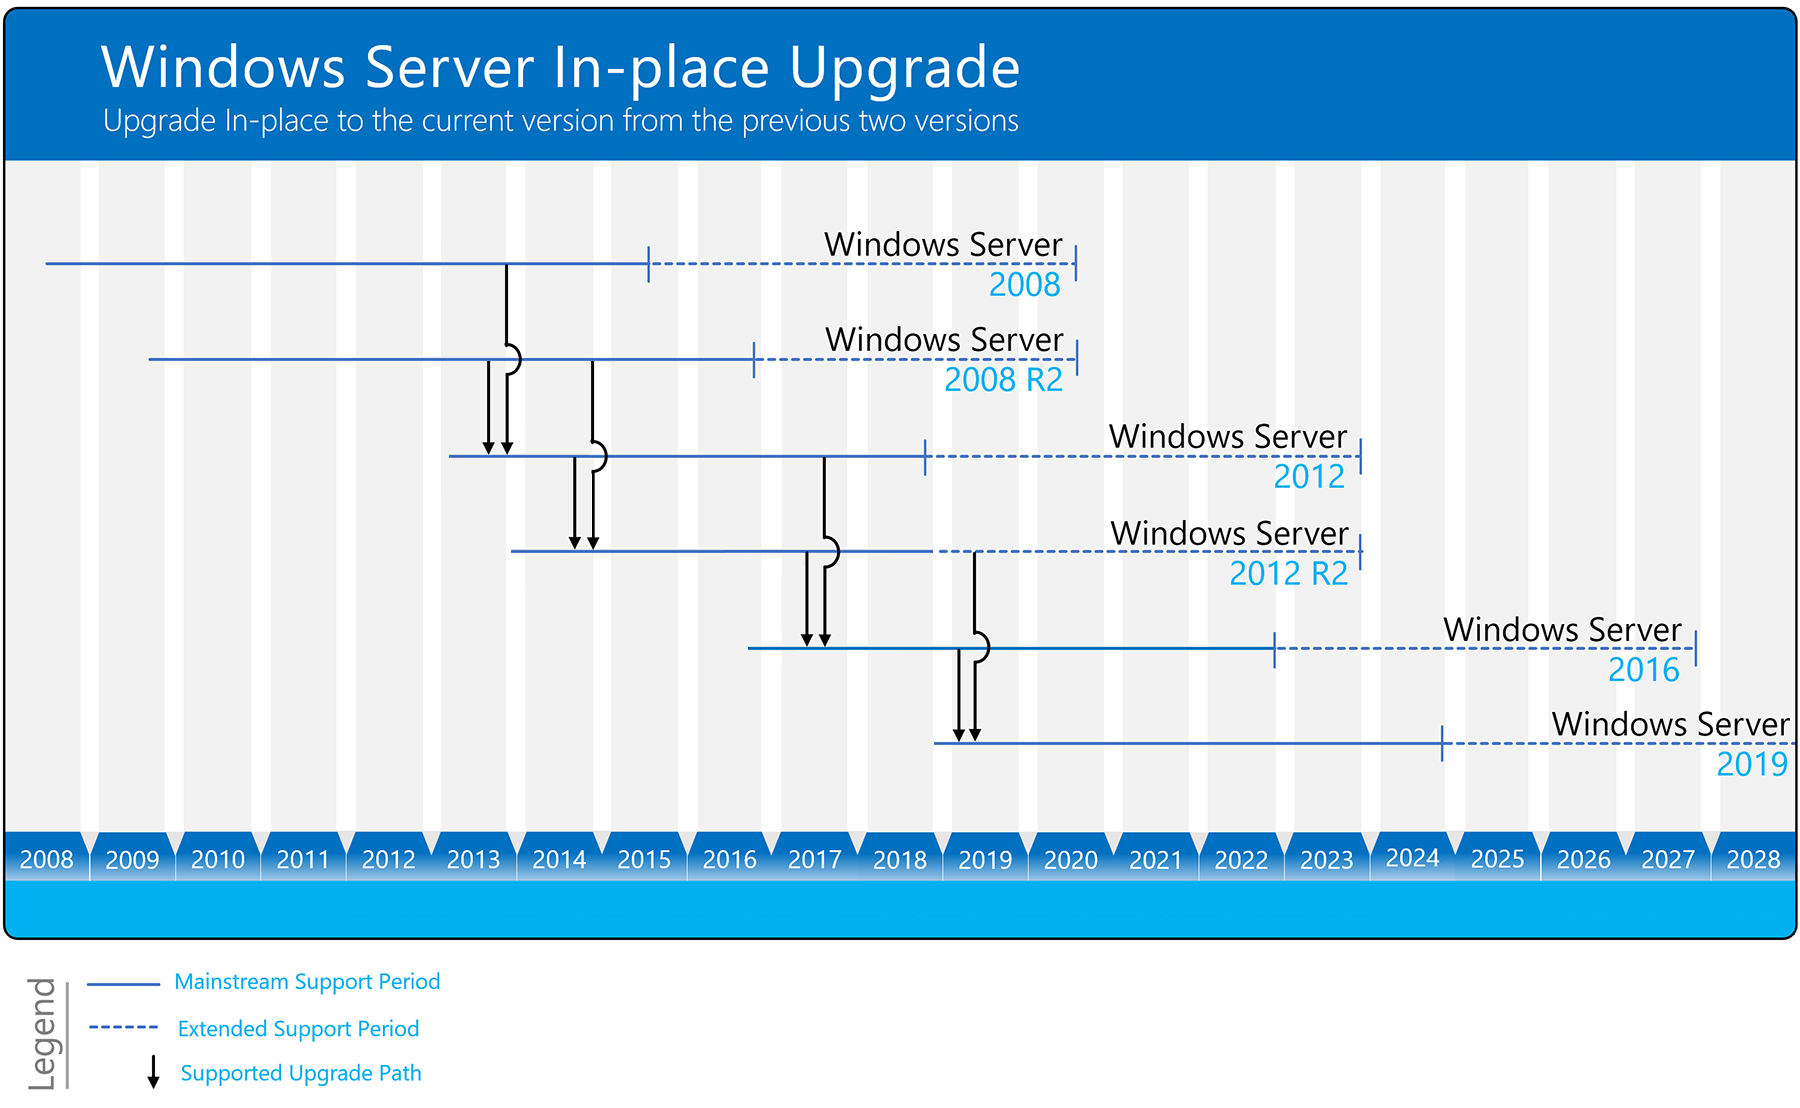 How to In-Place Upgrade Windows Server 2008 R2 to Windows Server 2019